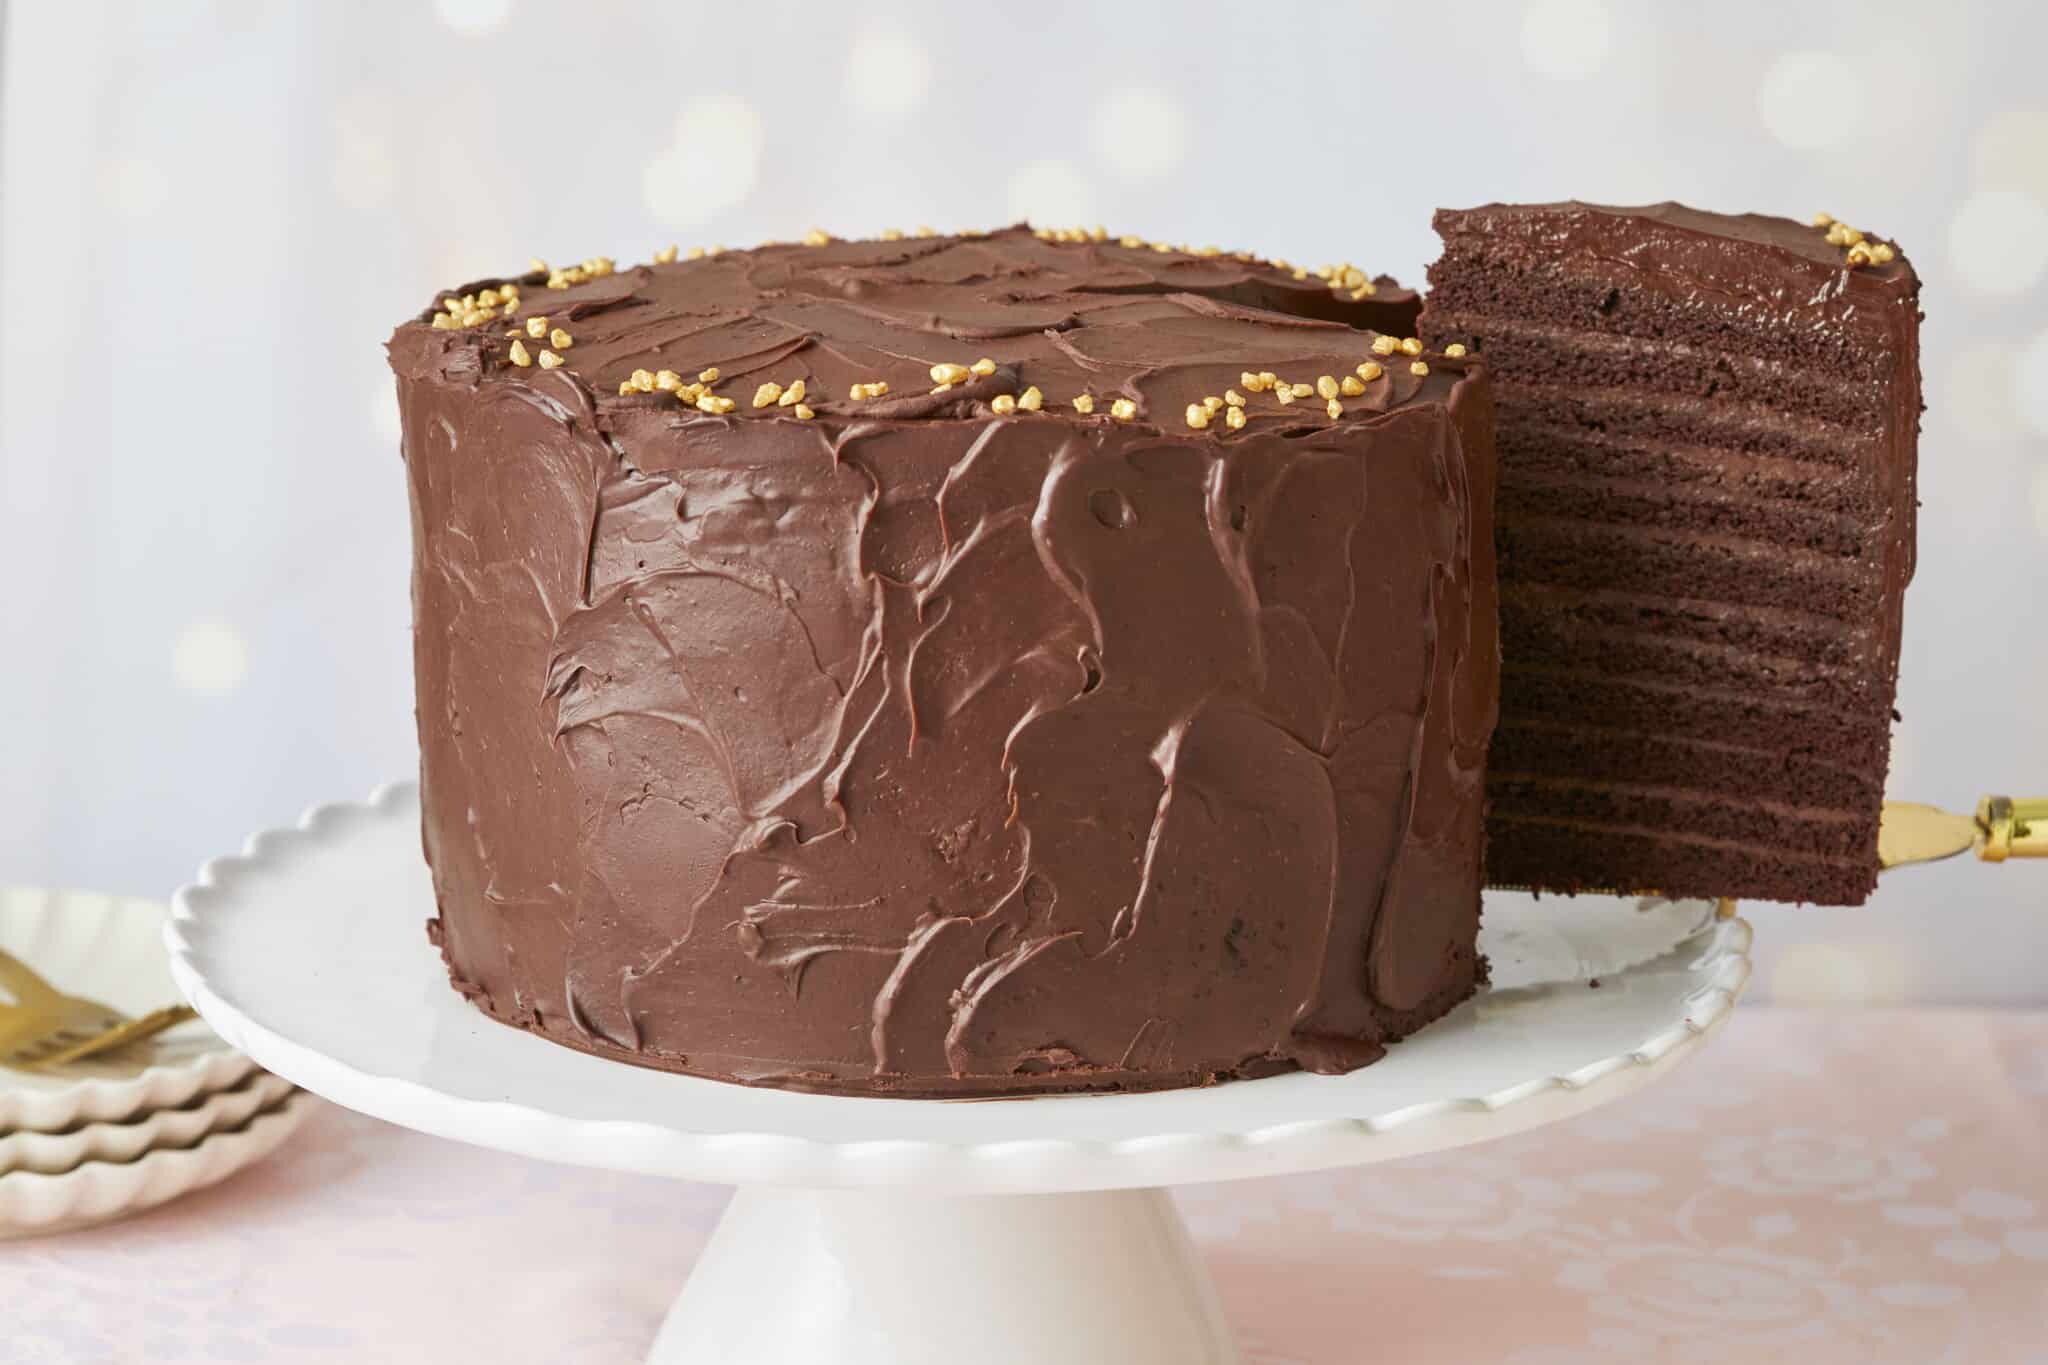 A generous slice of the 24-Layer Chocolate Cake is being lifted from the platter. A close-up shot at the slice shows its moist and soft crumb and silky smooth ganache on the outside and decadent chocolate pastry cream between the layers.